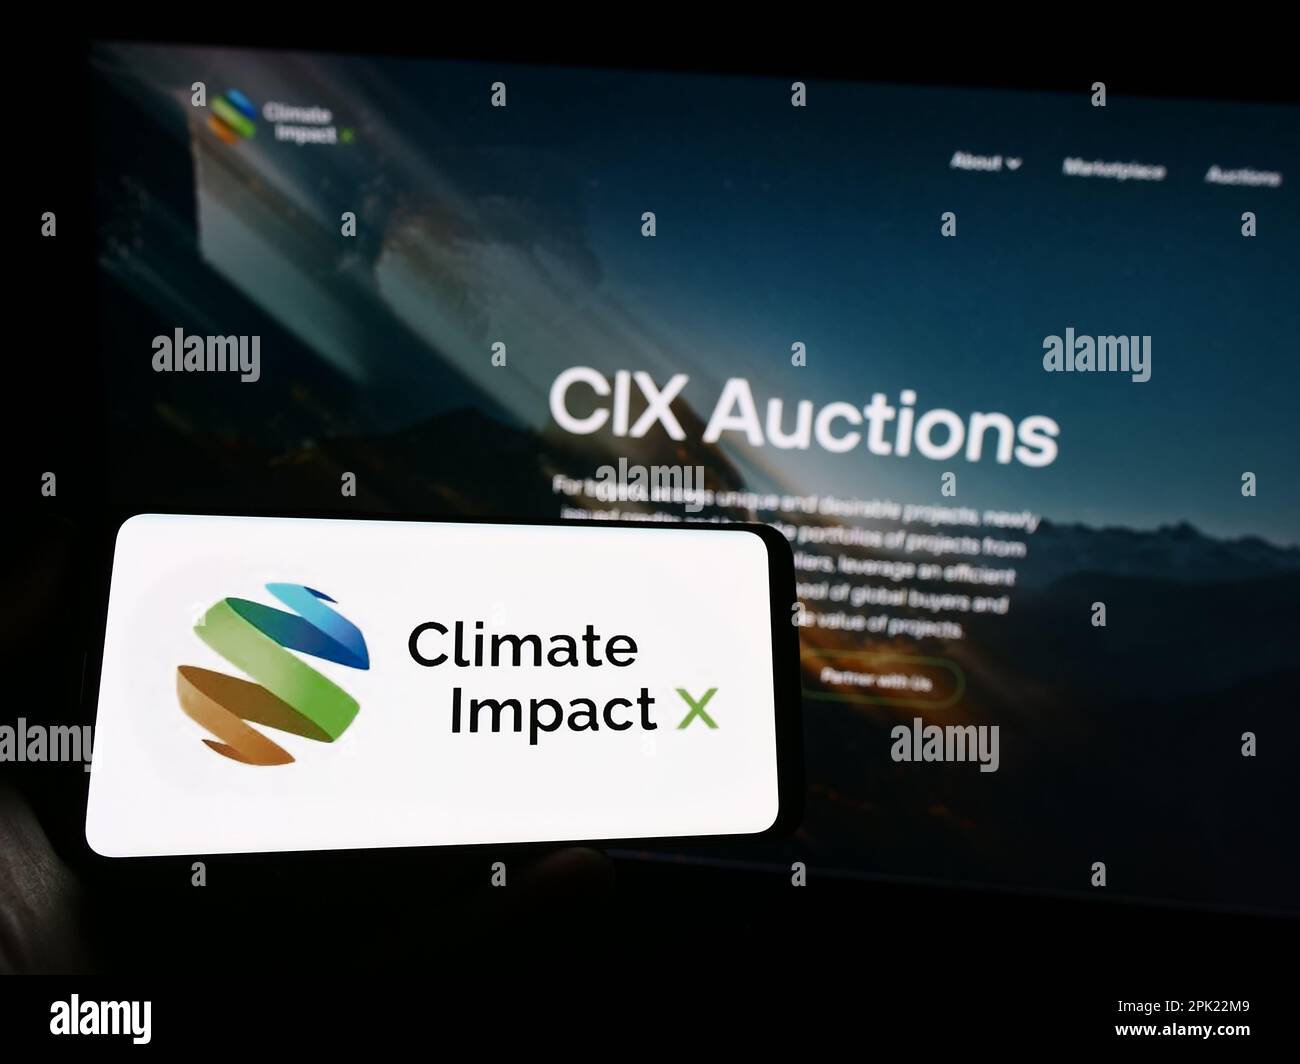 Person holding mobile phone with logo of carbon exchange Climate Impact X (CIX) on screen in front of business web page. Focus on phone display. Stock Photo